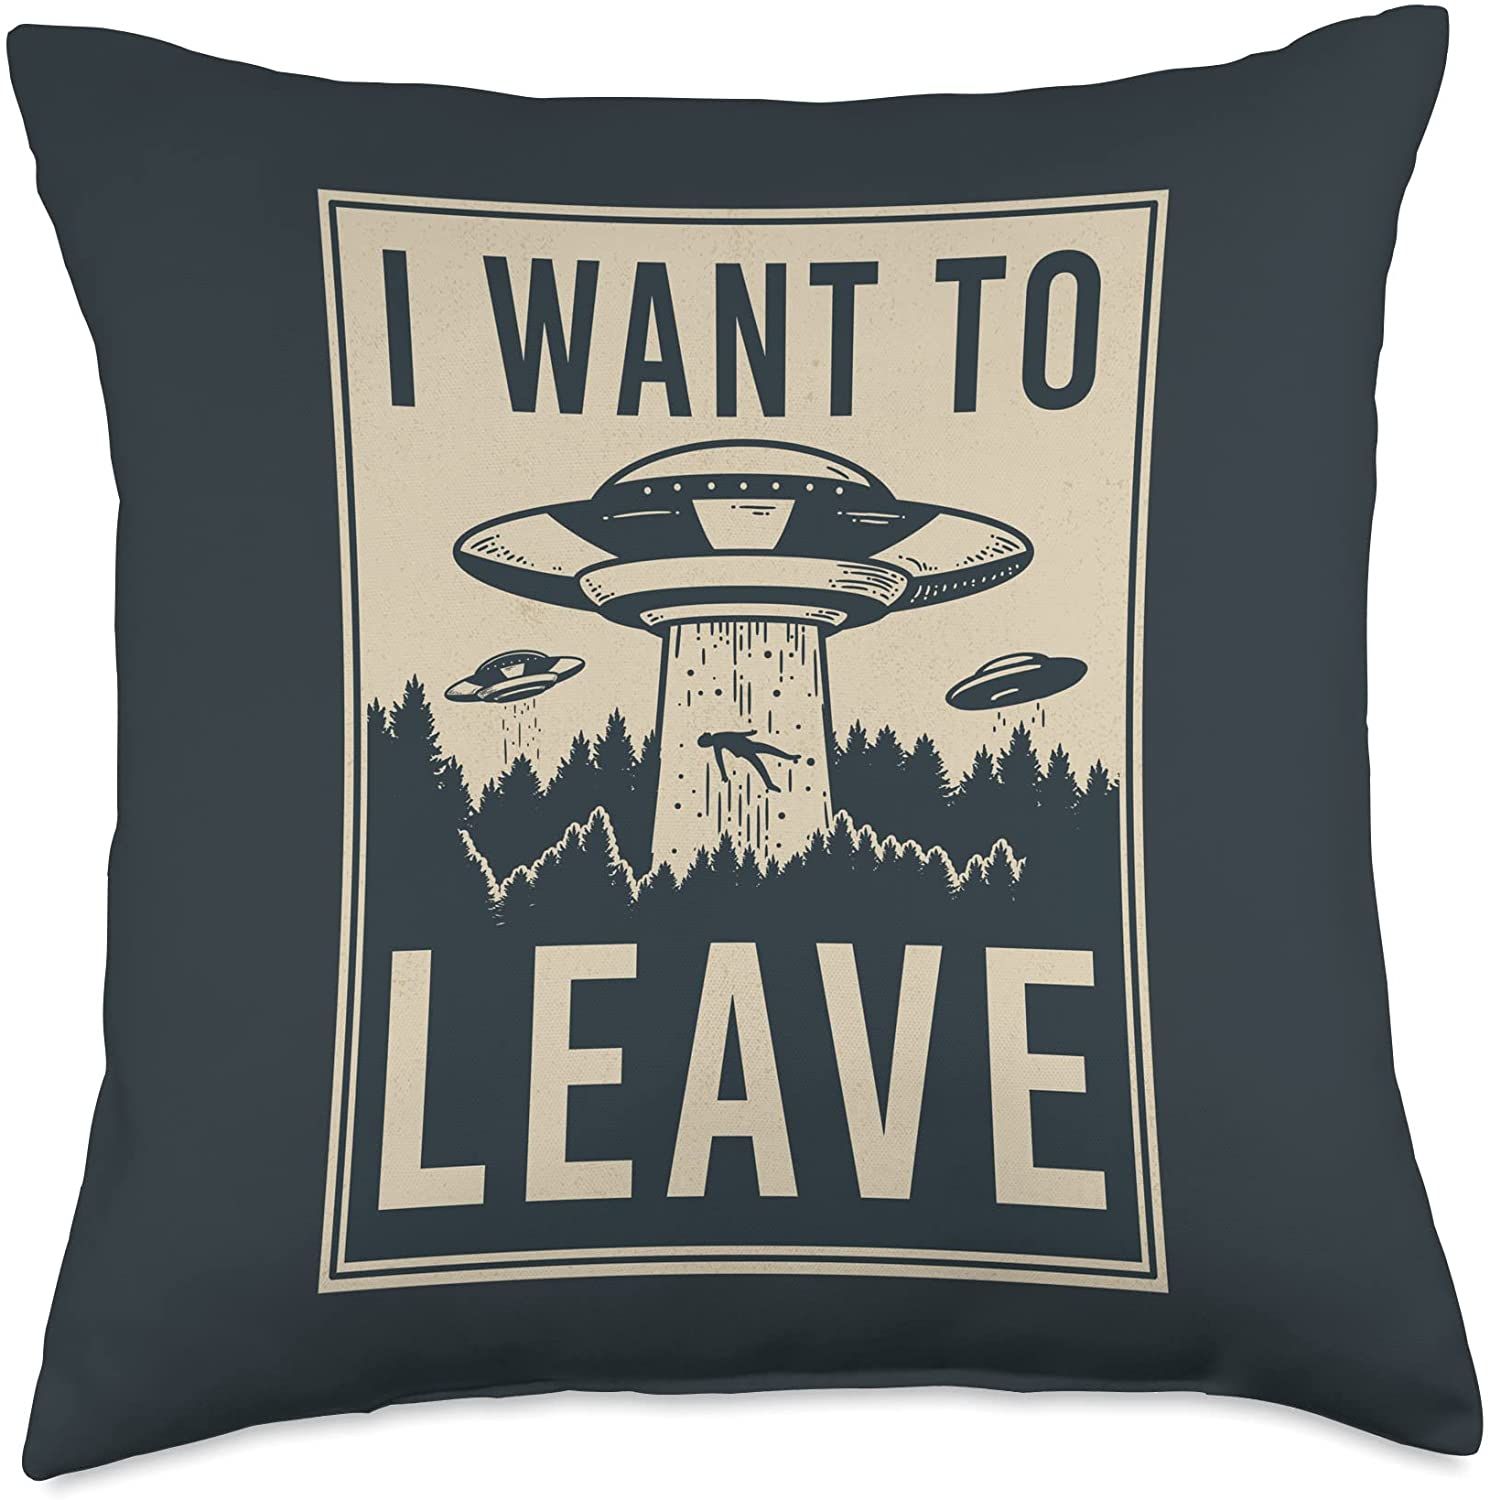 Funny Alien Extraterrestrial Believer Groovy UFO Alien Retro Vintage I Want to Believe Groovy Peace Space UFO Throw Pillow Multicolor 18x18 